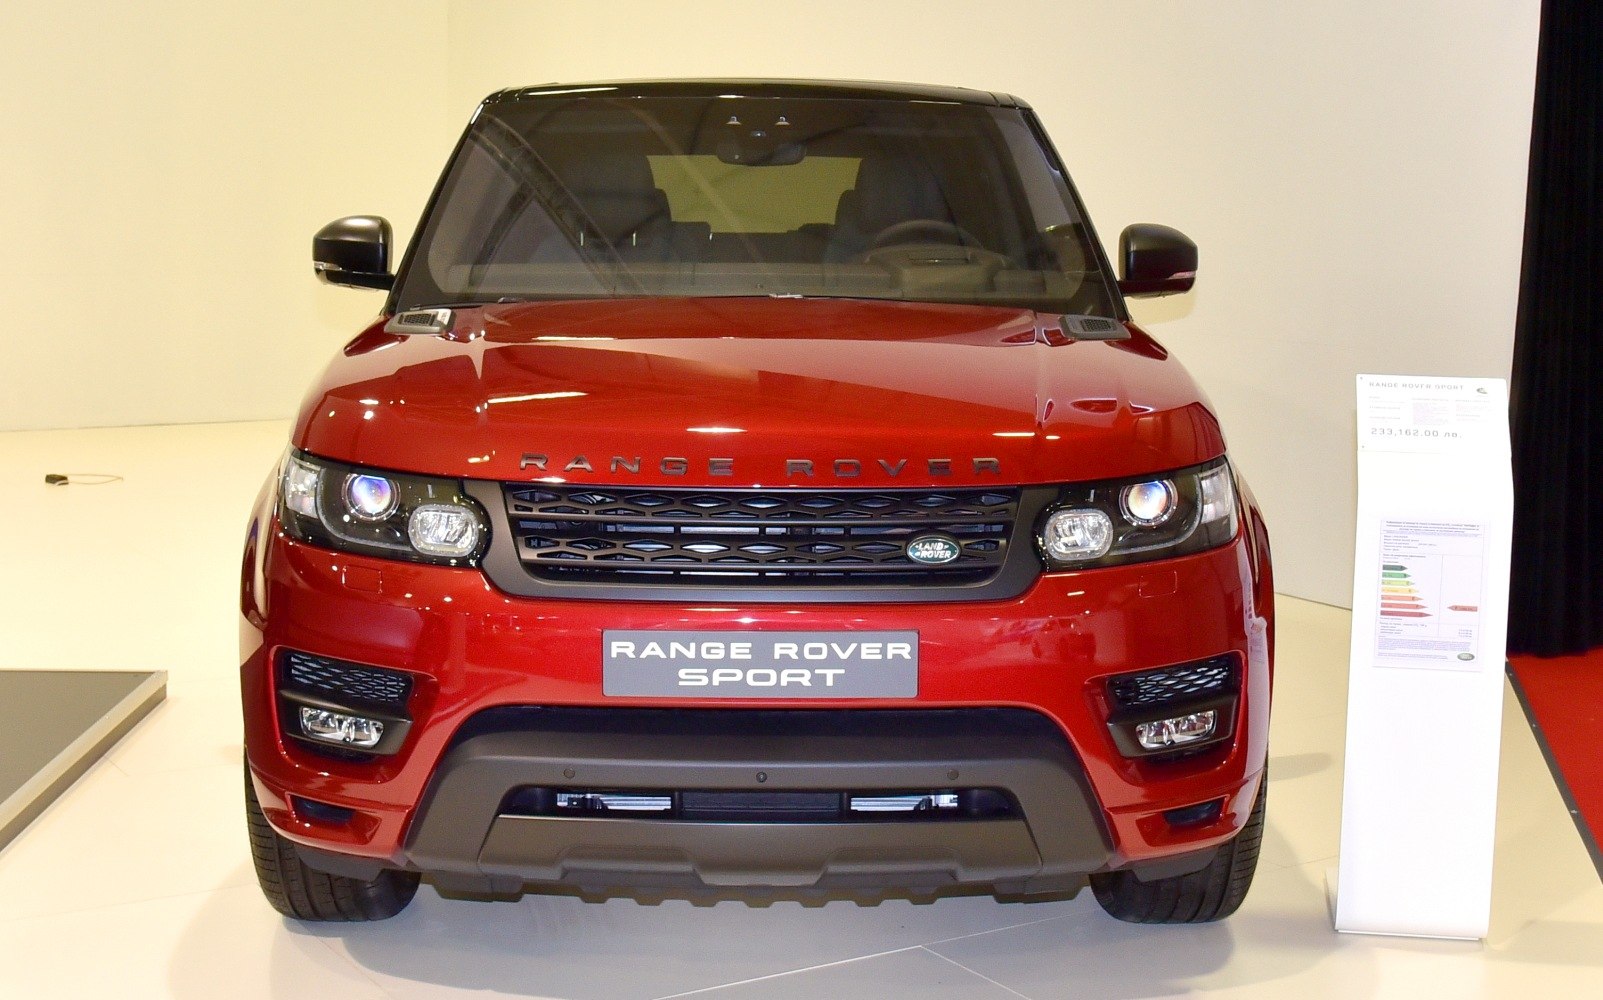 https://totalrenting.es/wp-content/uploads/2022/10/land-rover-range-rover-sport-ii-2013-3-0-v6-340-cv-awd-automatic-supercharged-suv.png